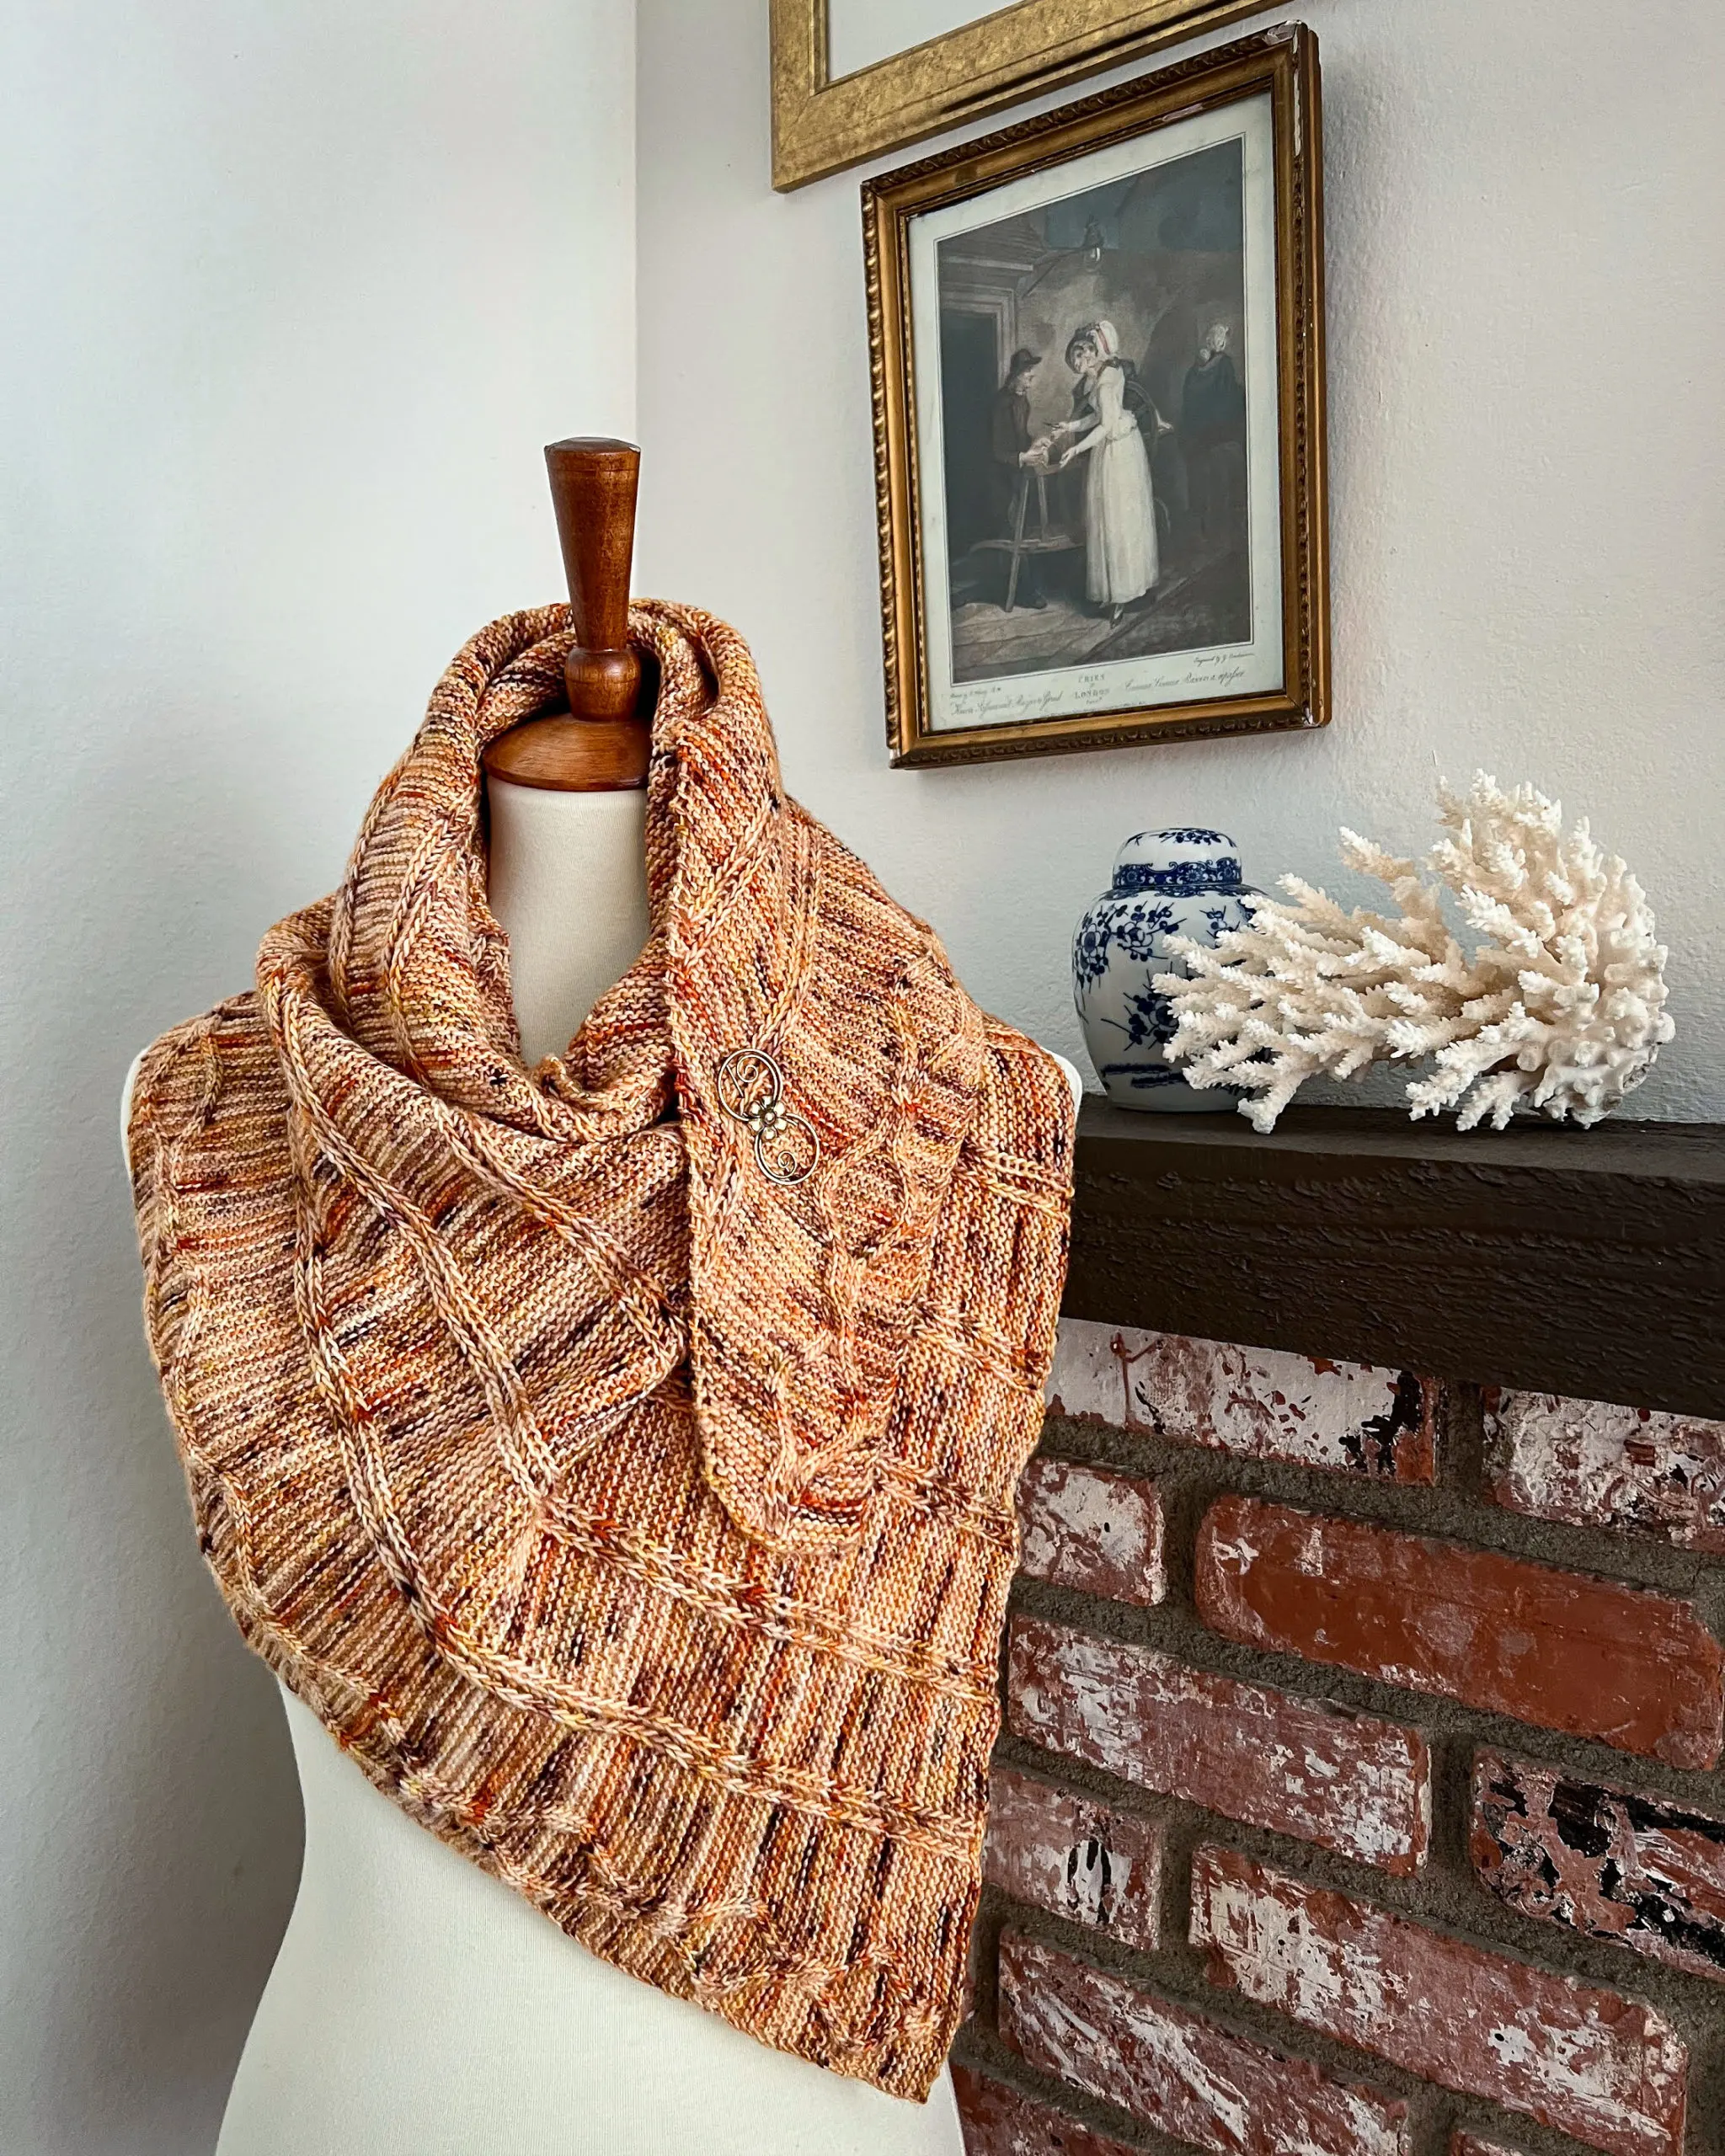 An orange triangular shawl with columns of slipped stitches and a cabled edging is wrapped around a white dressmaker's form. In the background are a brick fireplace, some white coral, a blue and white ginger jar, and antique prints on the wall.